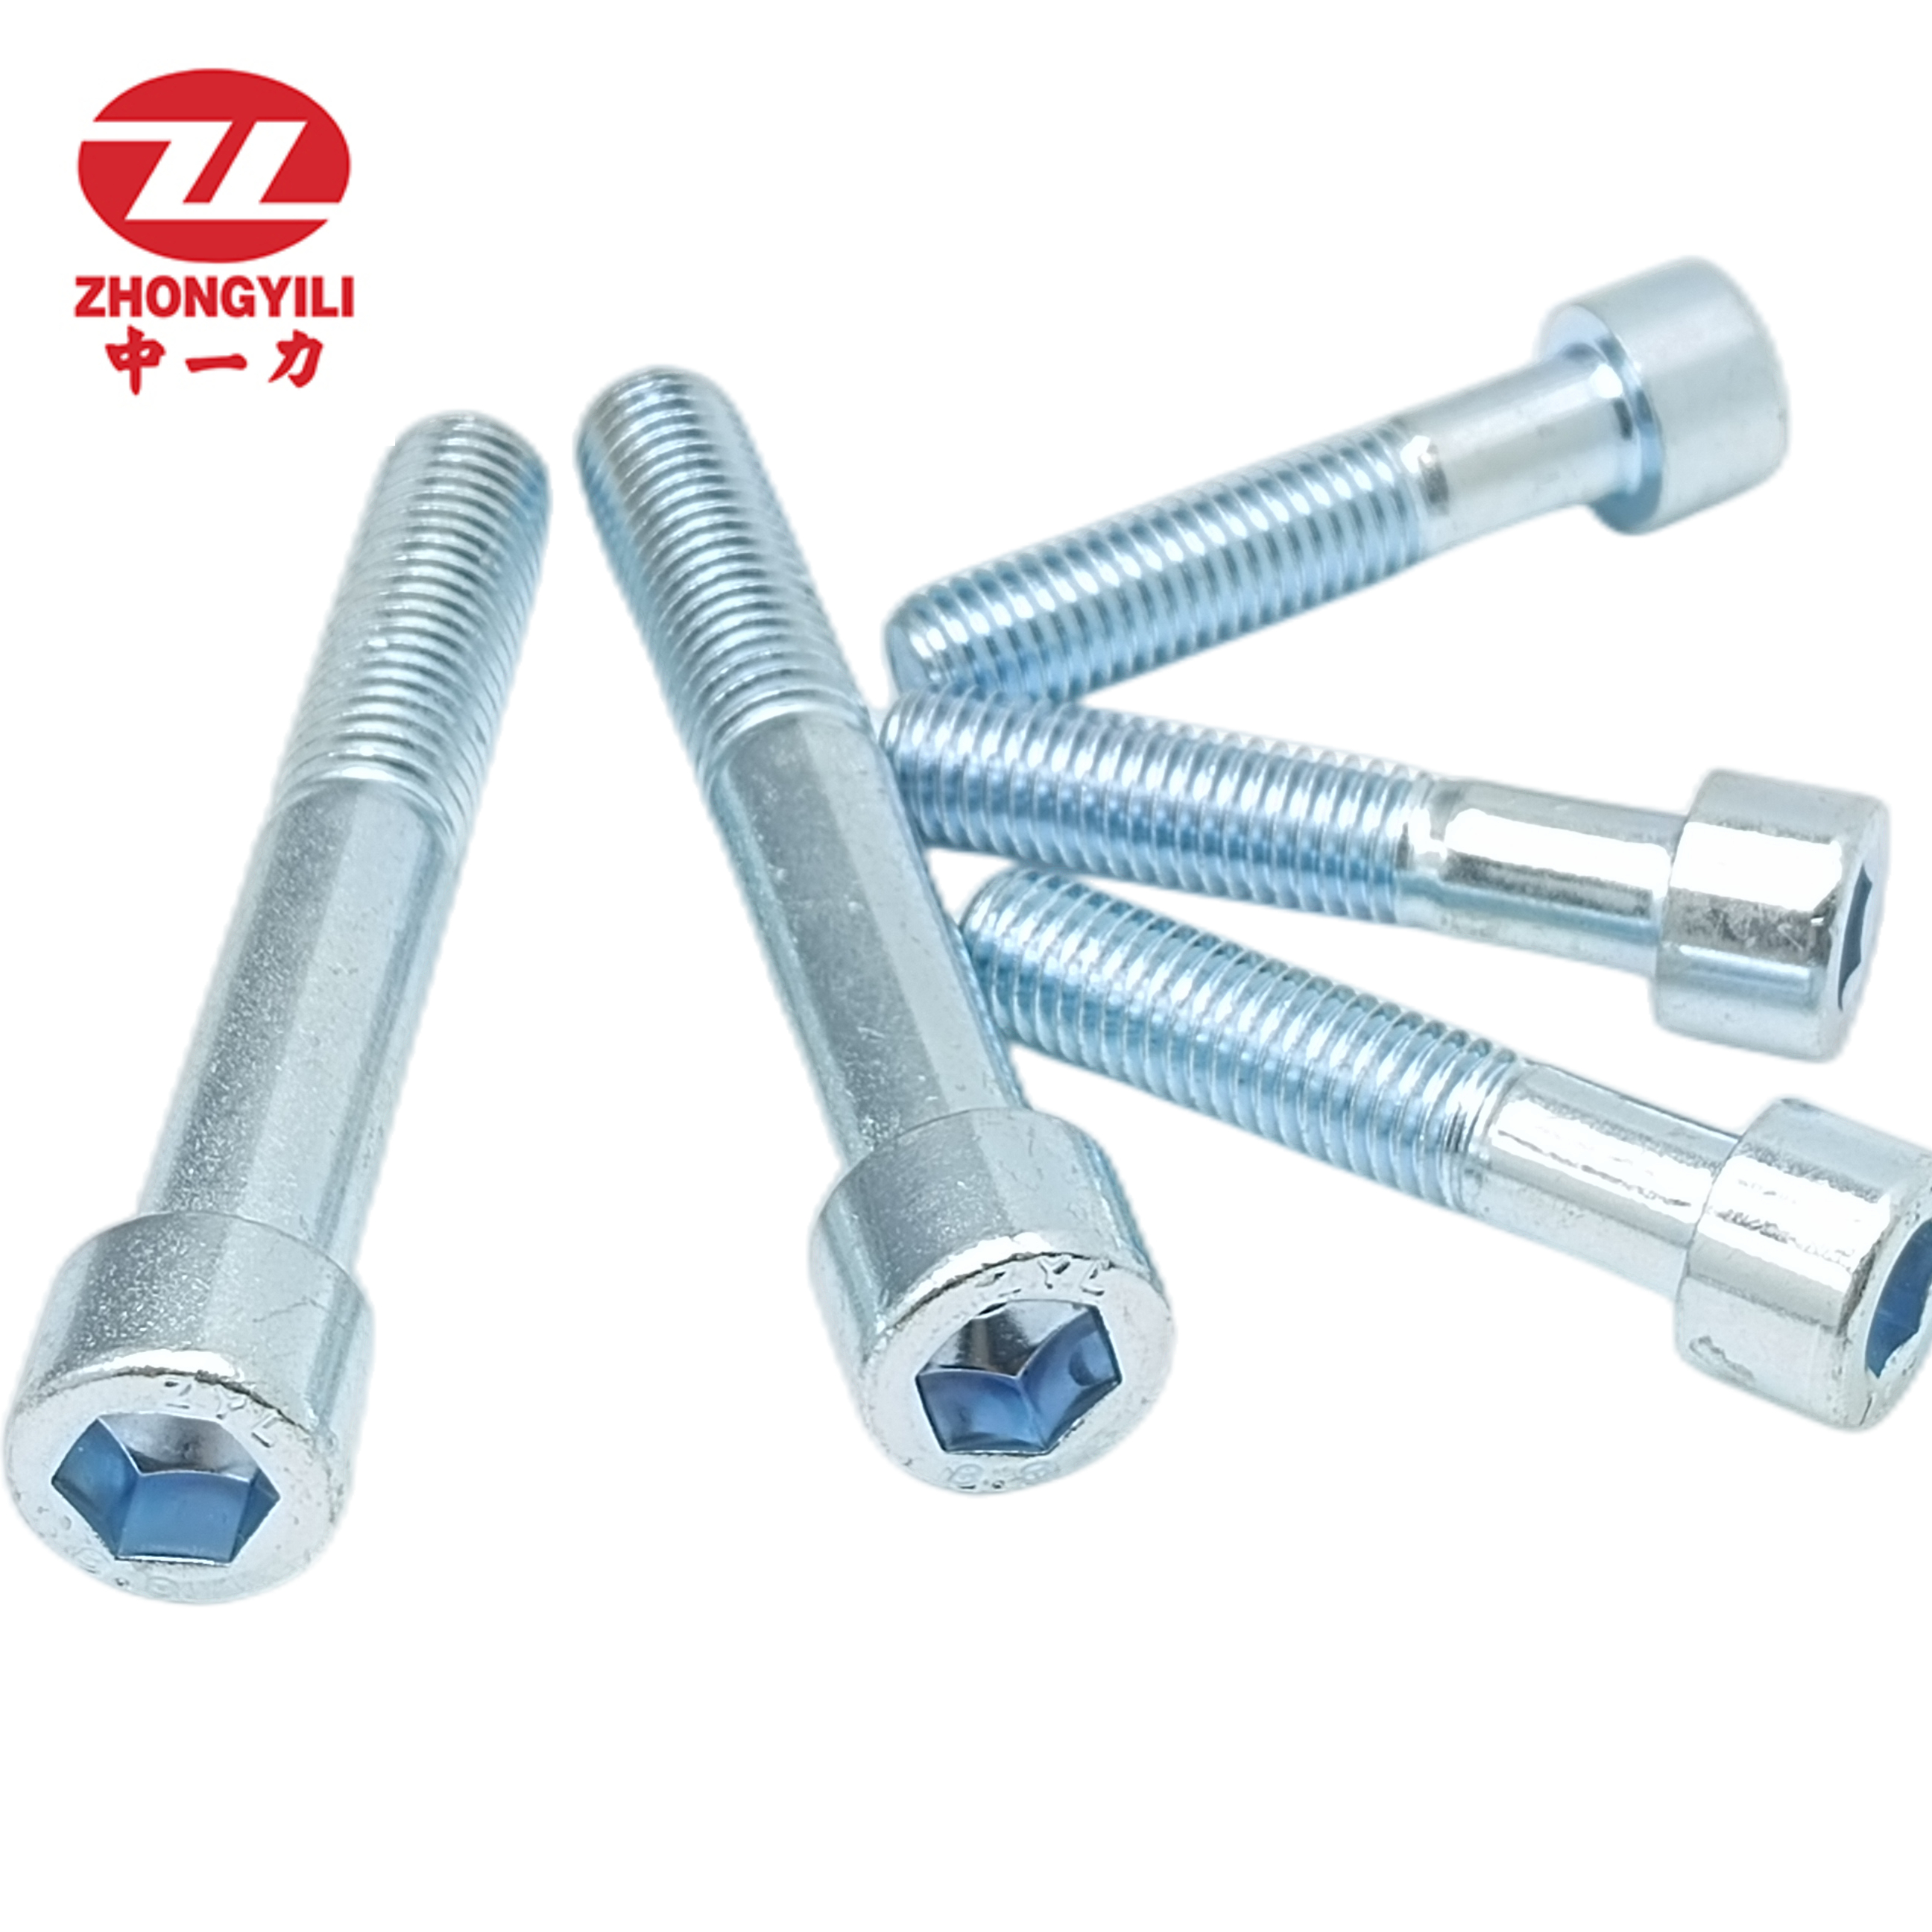 Zinc plated hex socket bolts screws full series Featured Image